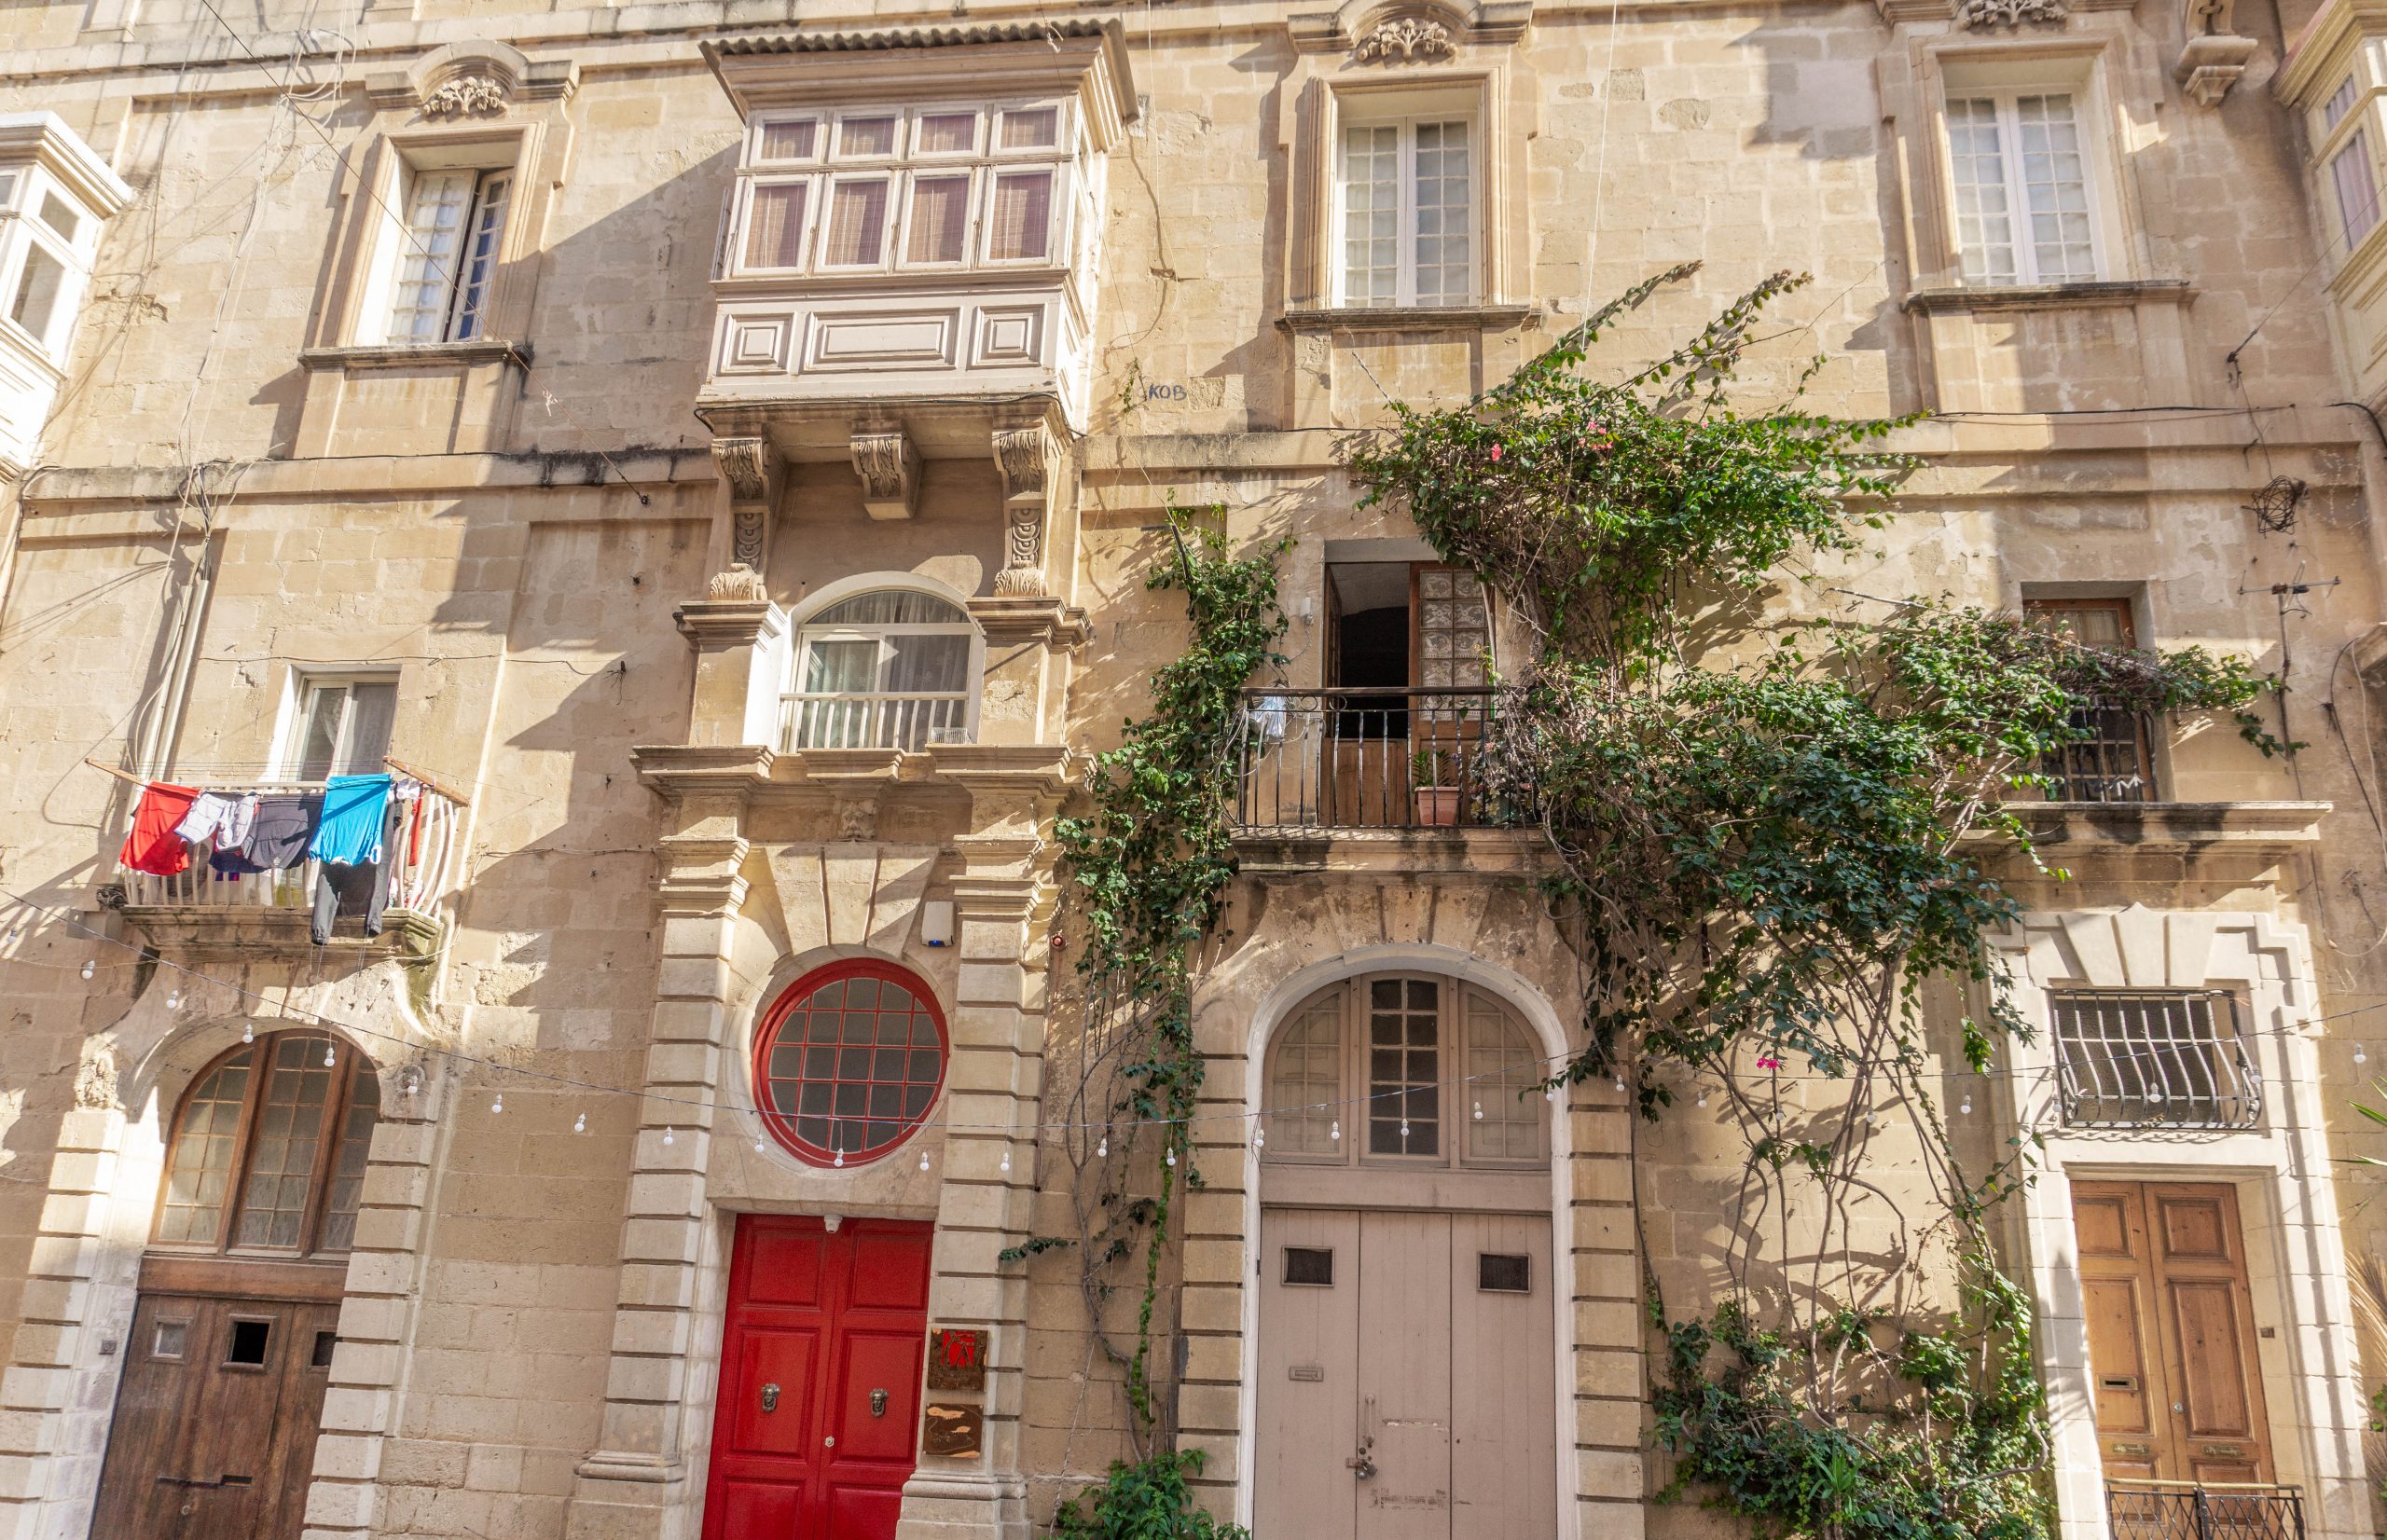 Things to do in the city of Valletta, Malta